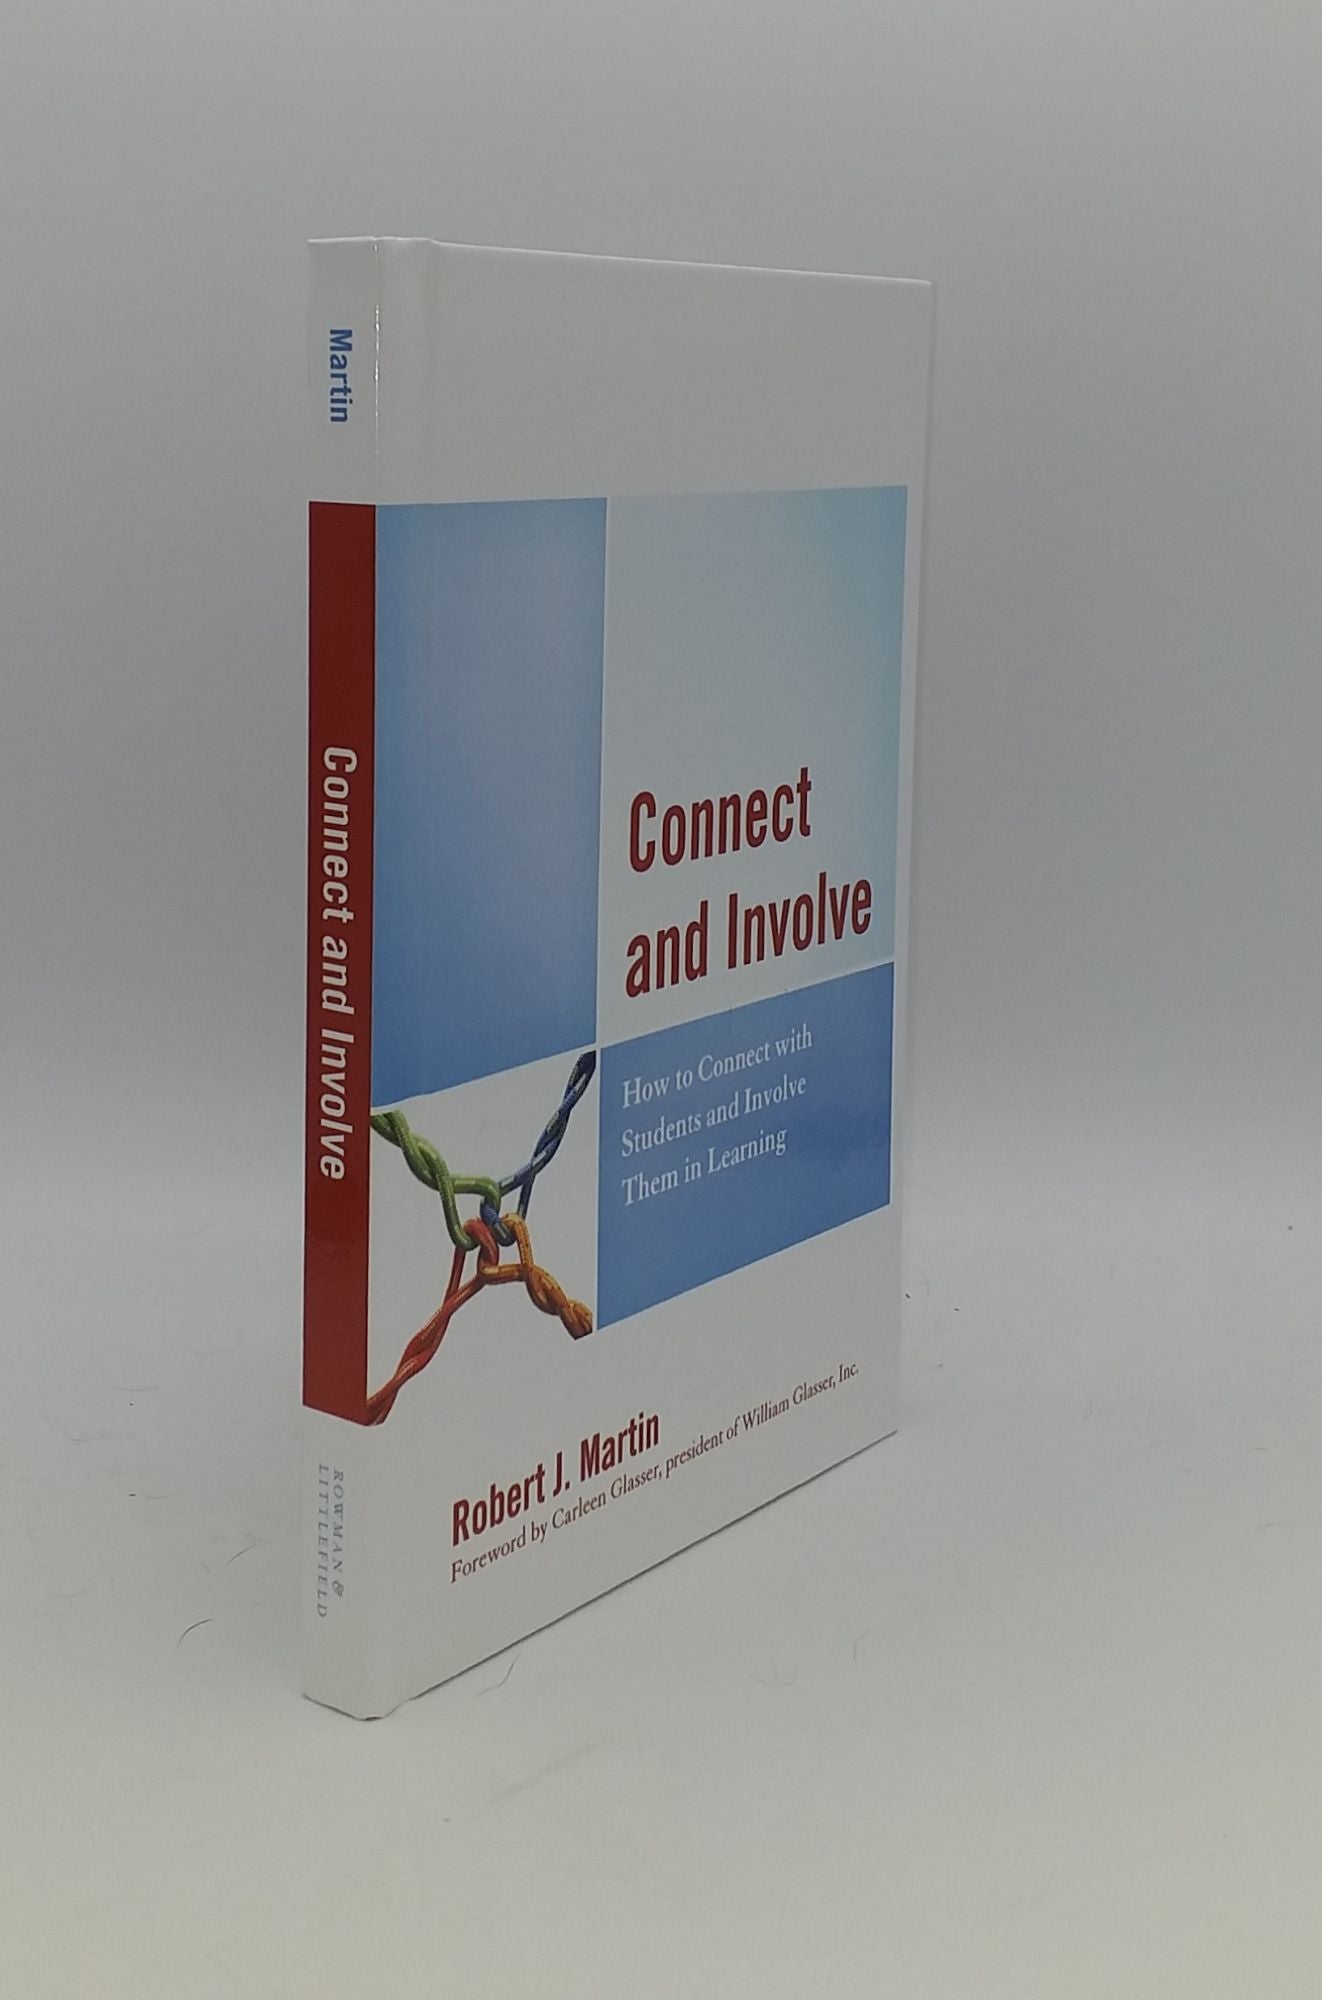 MARTIN Robert J. - Connect and Involve How to Connect with Students and Involve Them in Learning